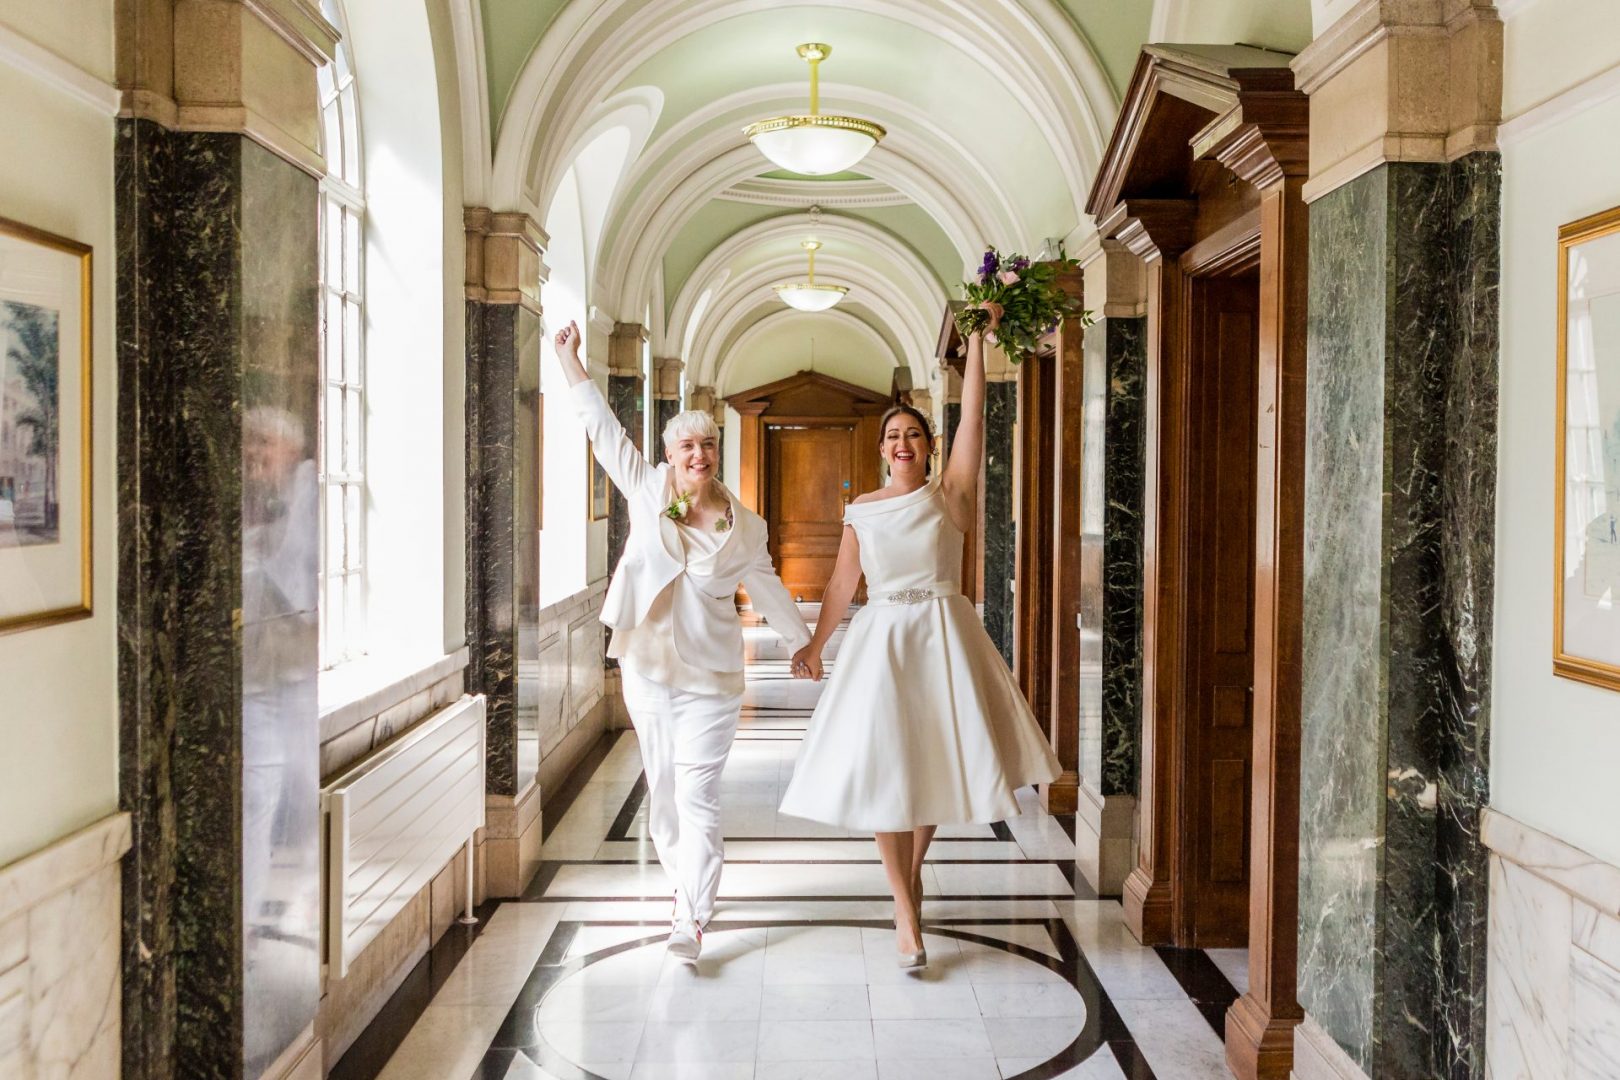 Two brides walking with arms raised at Islington town hall